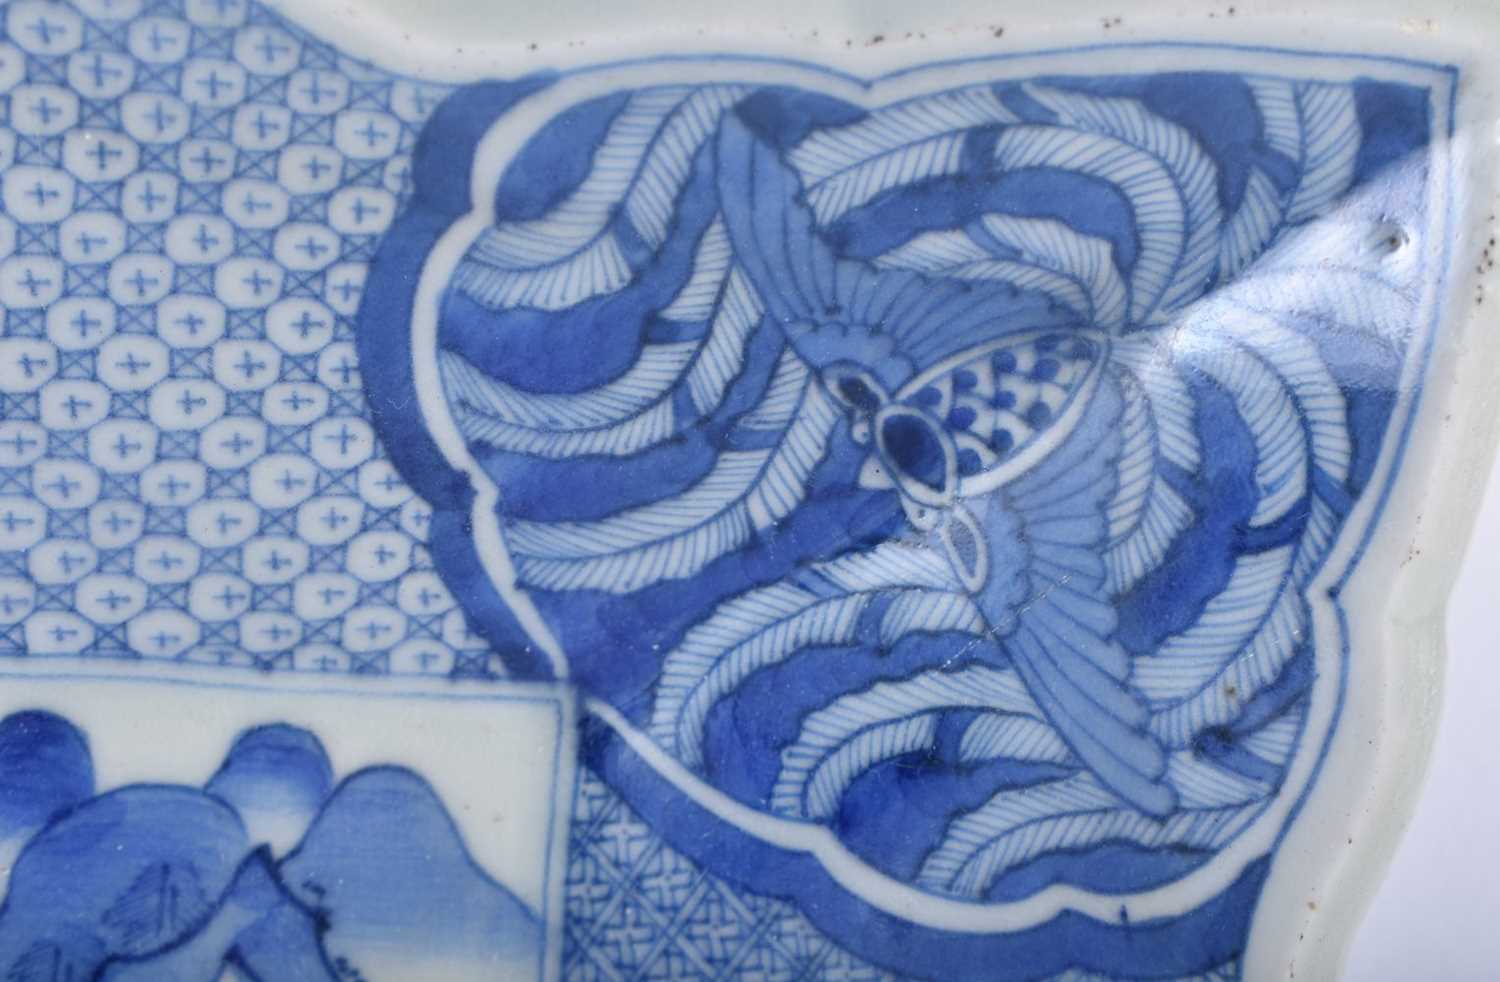 A VERY LARGE 19TH CENTURY JAPANESE MEIJI PERIOD BLUE AND WHITE RECTANGULAR TRAY painted with a house - Image 3 of 4